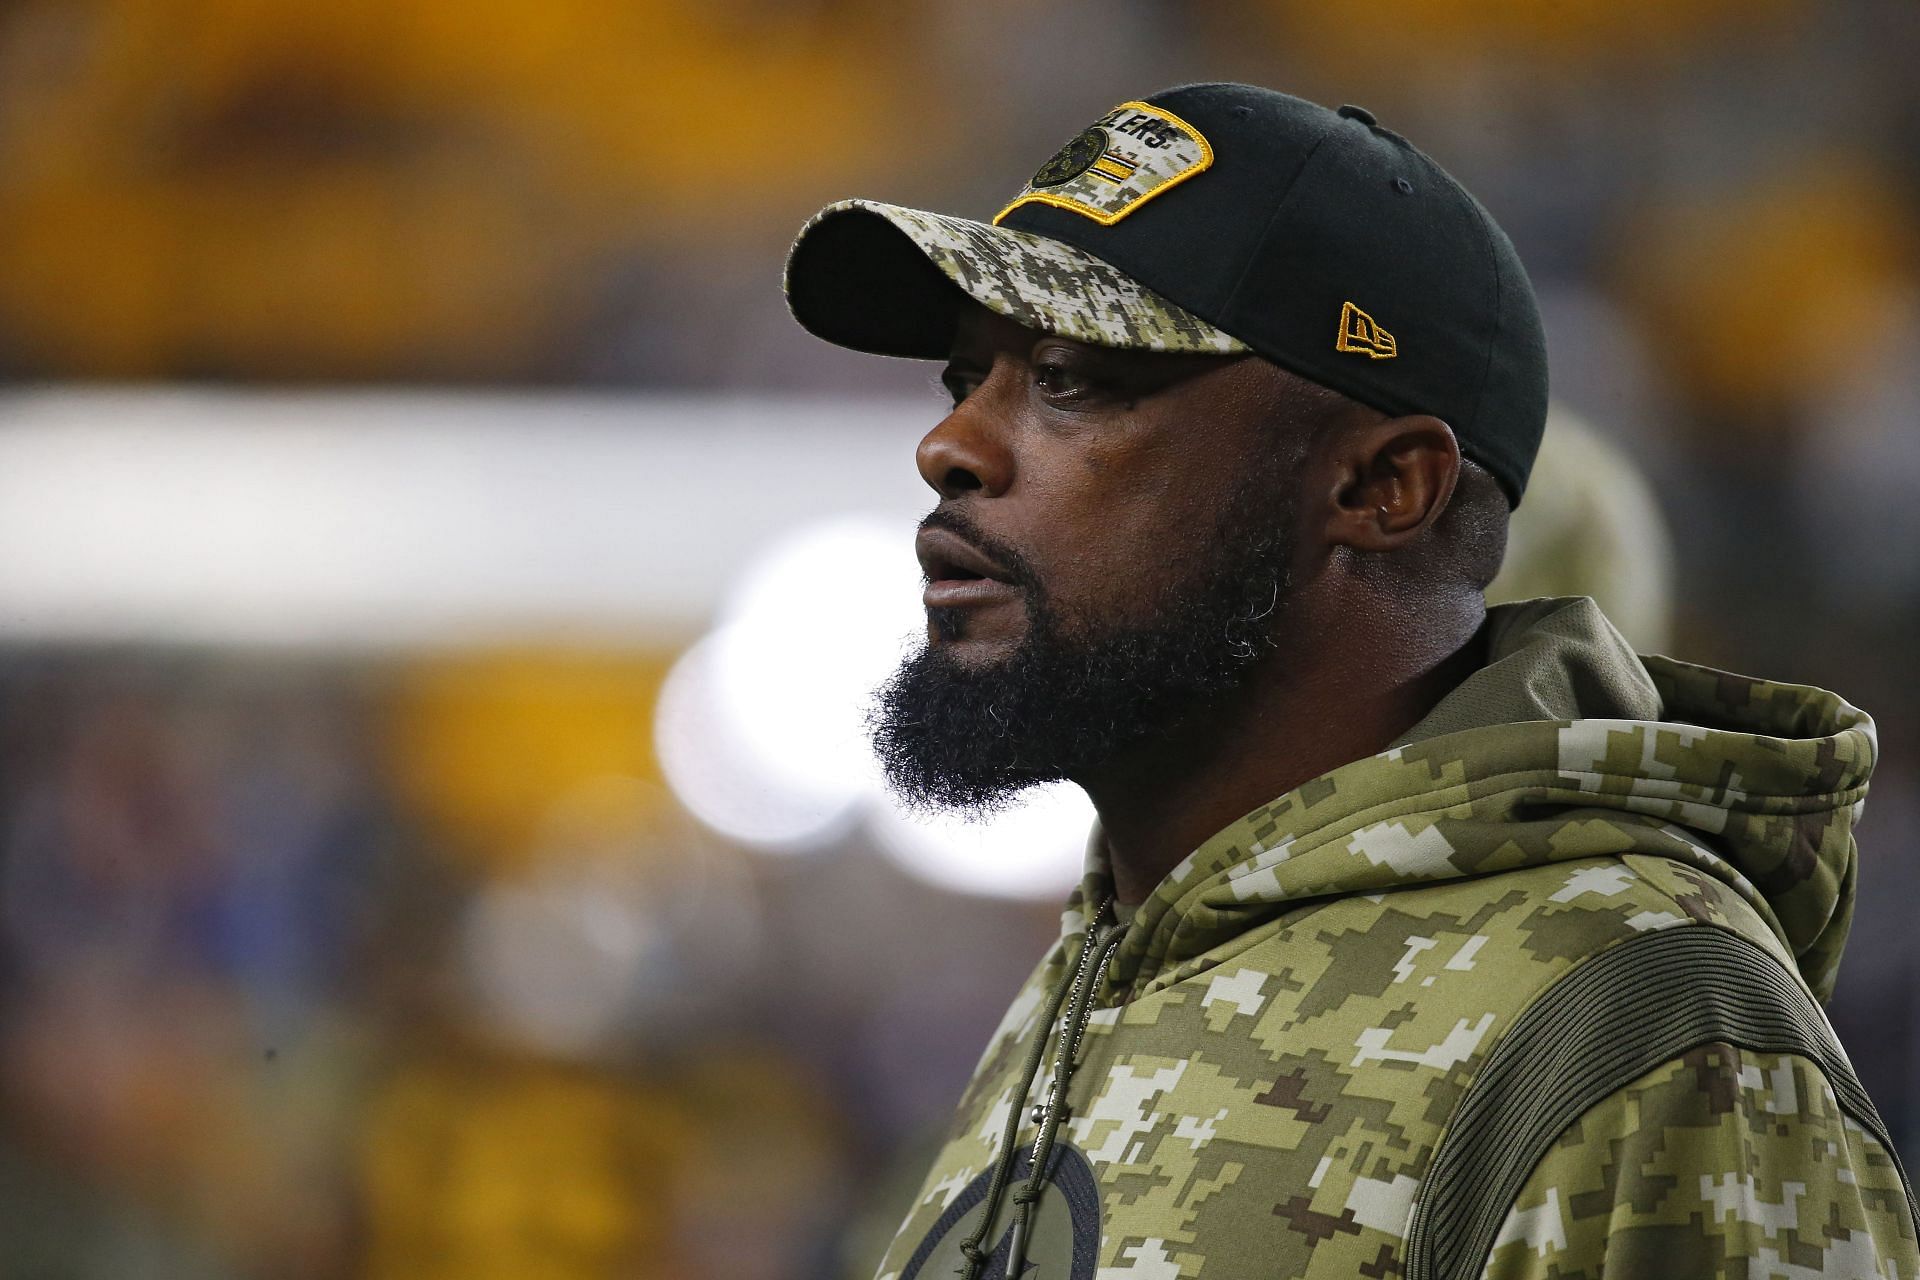 Mike Tomlin has a career record of 151-84-2 with the Steelers